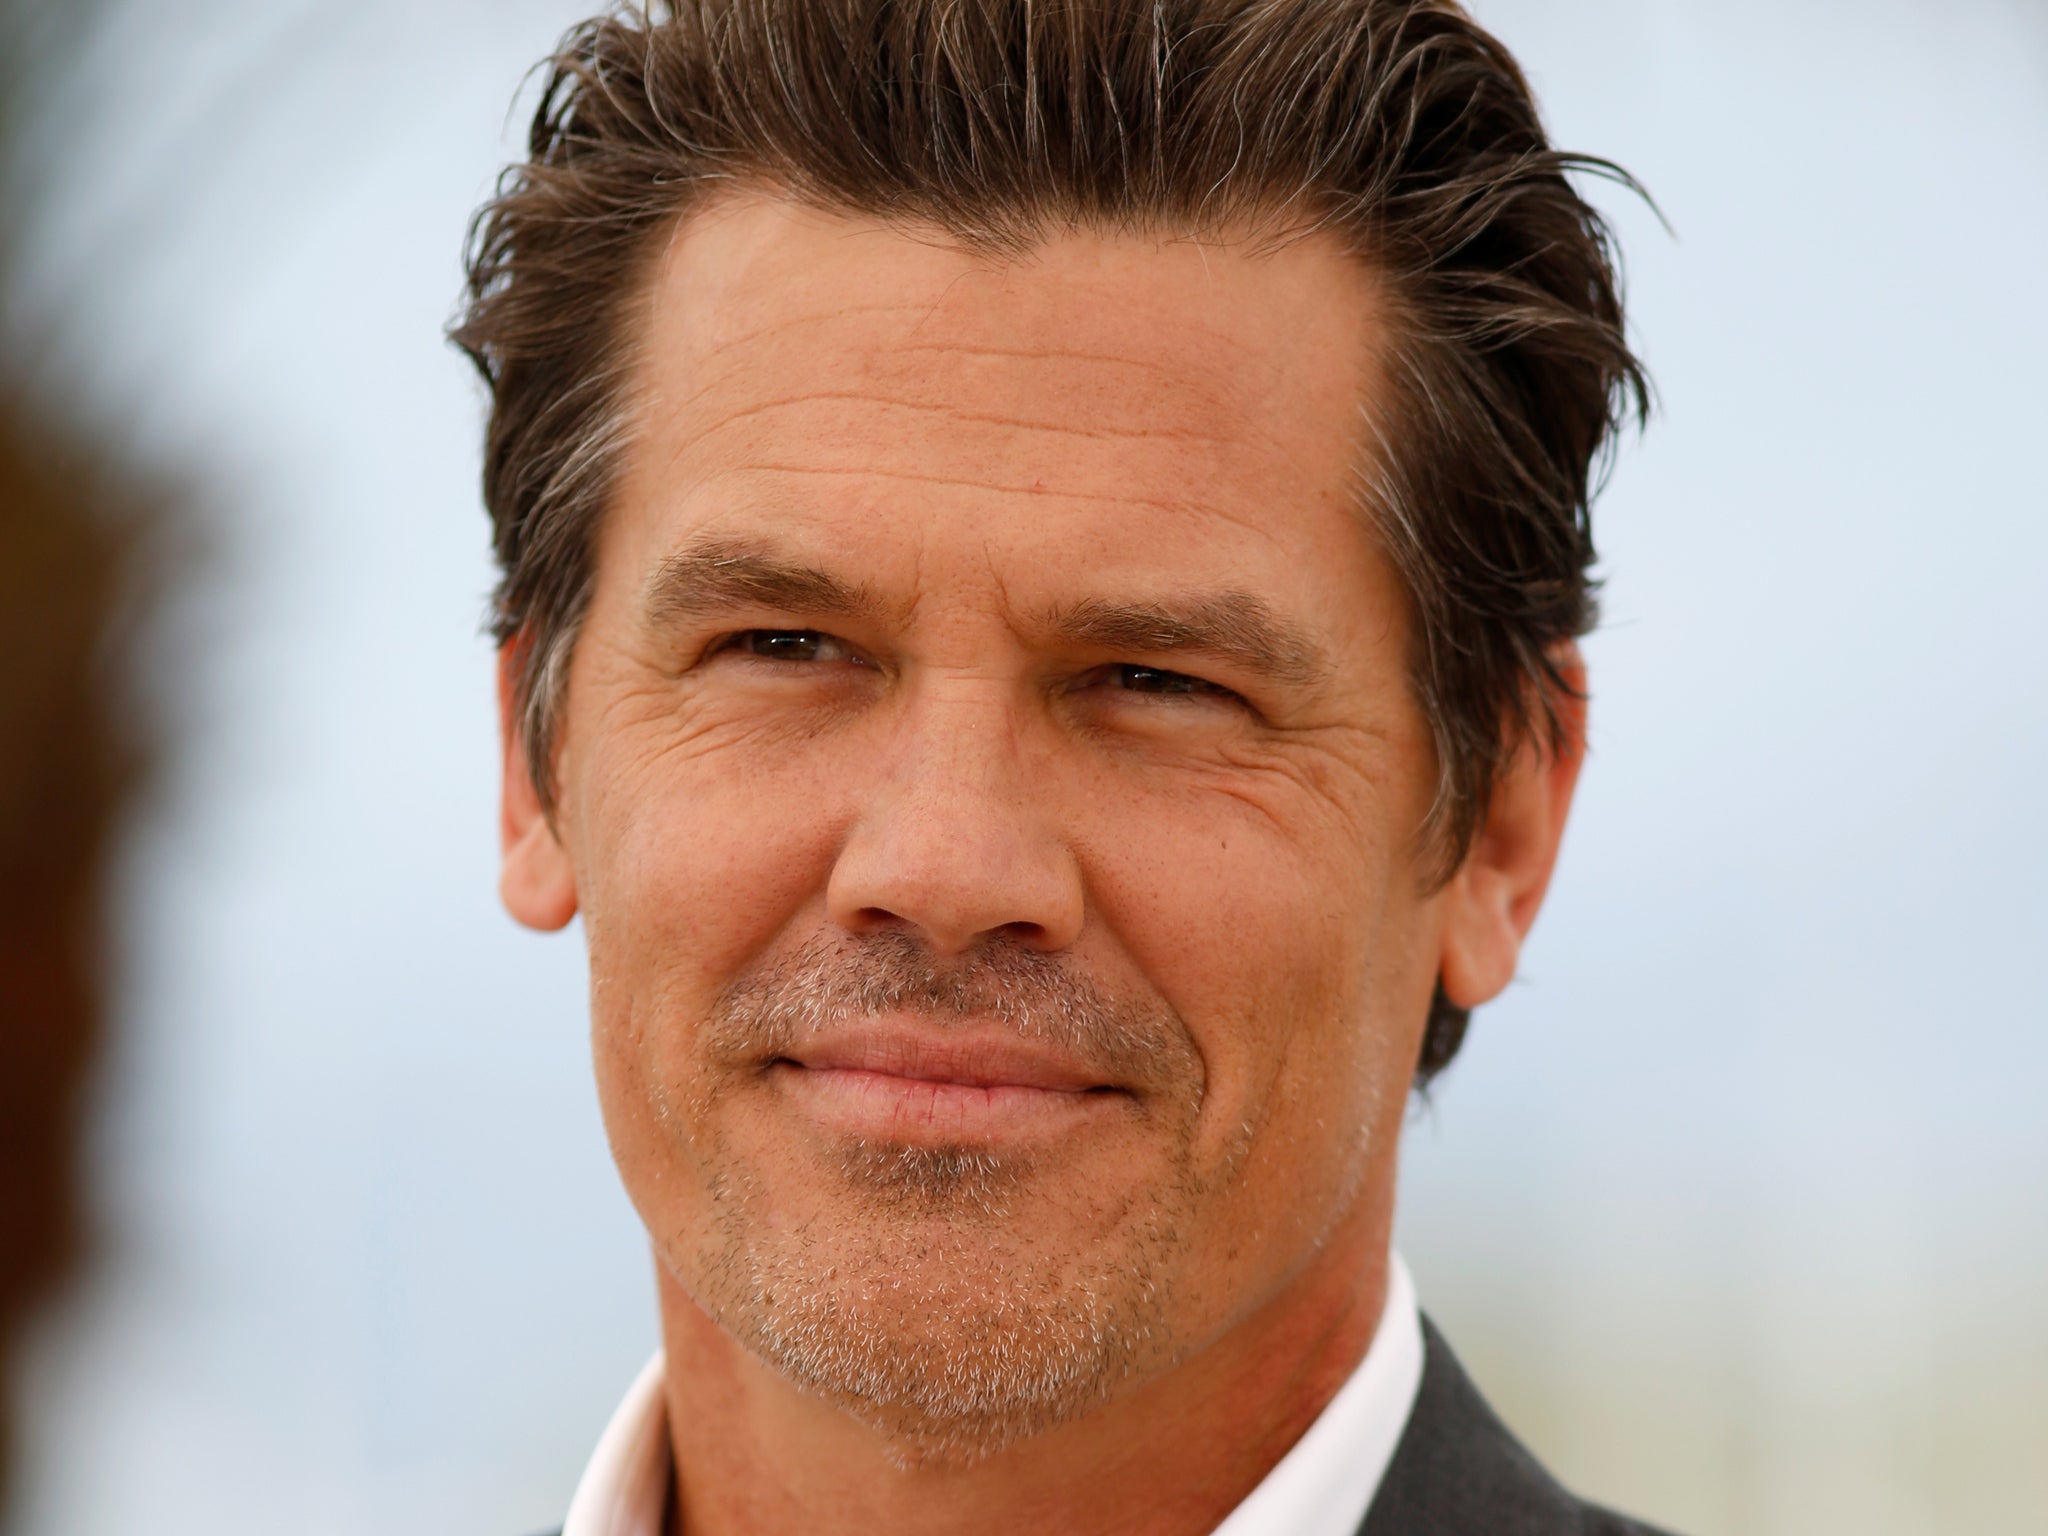 Actor Josh Brolin attends a photocall for "Sicario" during the 68th annual Cannes Film Festival